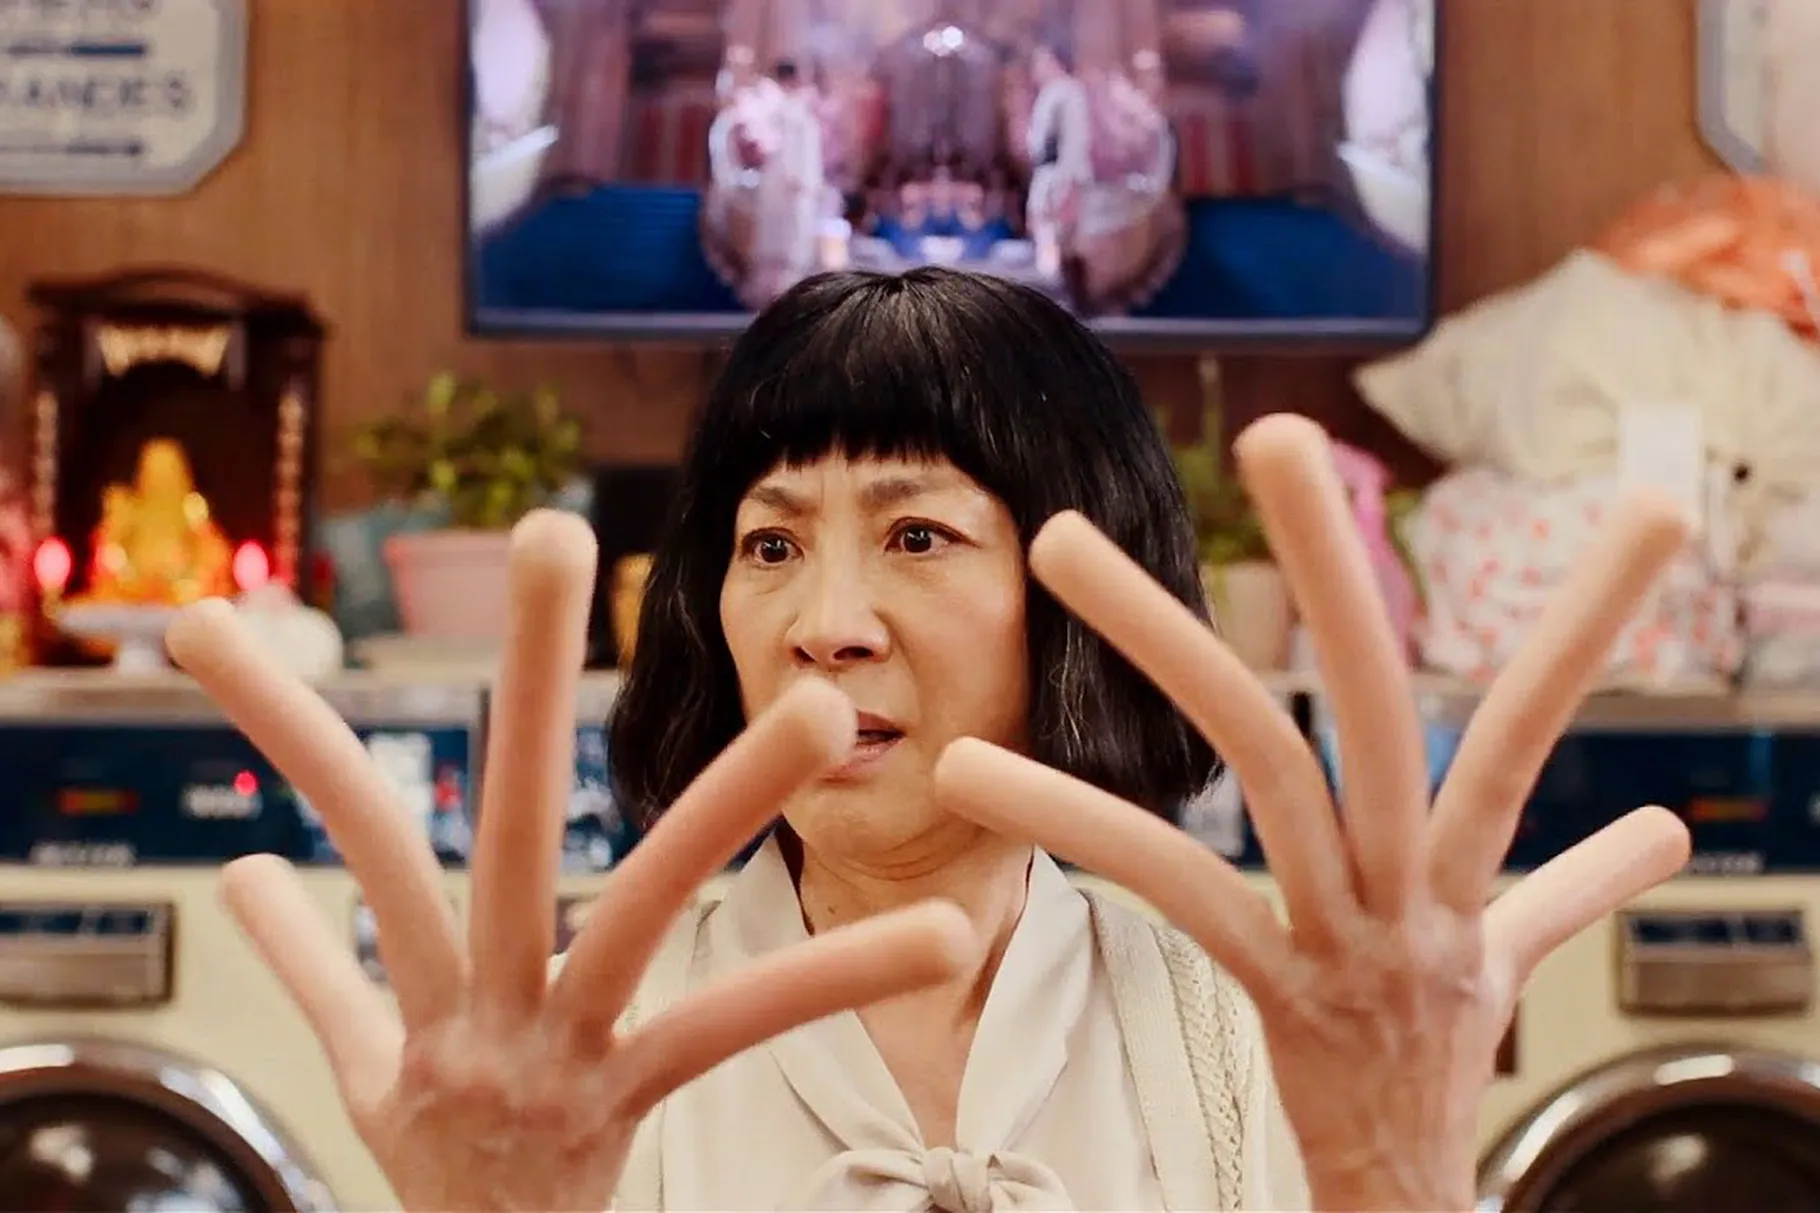 An older chinese woman stares at her own hands she's holding up in front of her which feature hot dogs instead of her fingers fingers